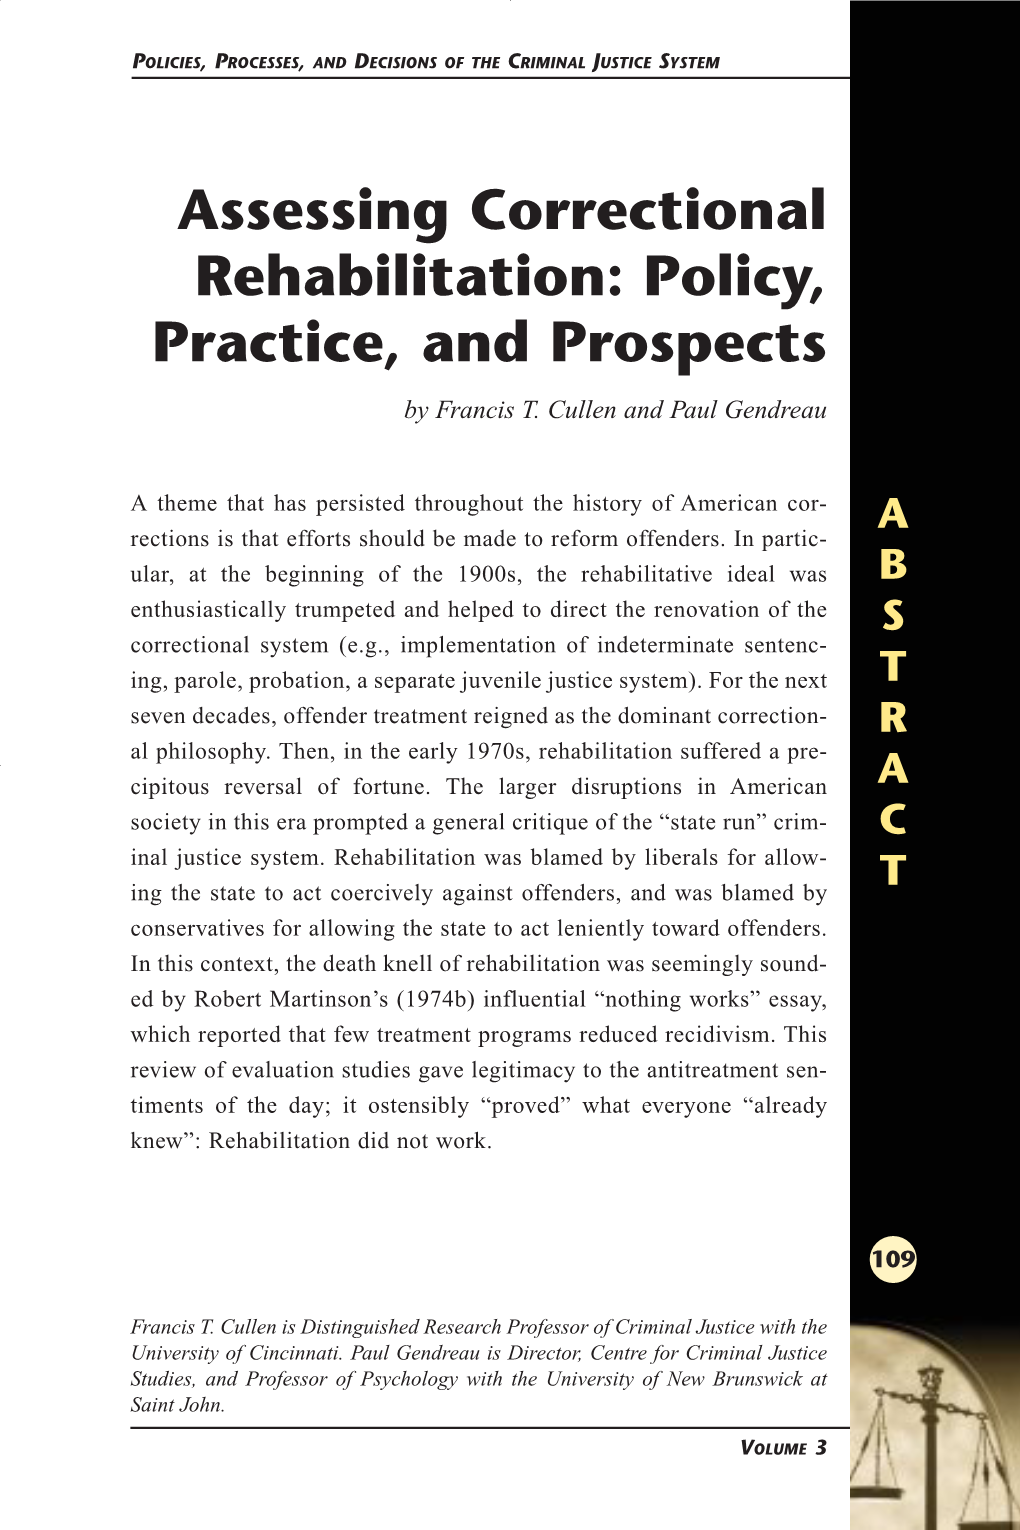 Assessing Correctional Rehabilitation: Policy, Practice, and Prospects by Francis T